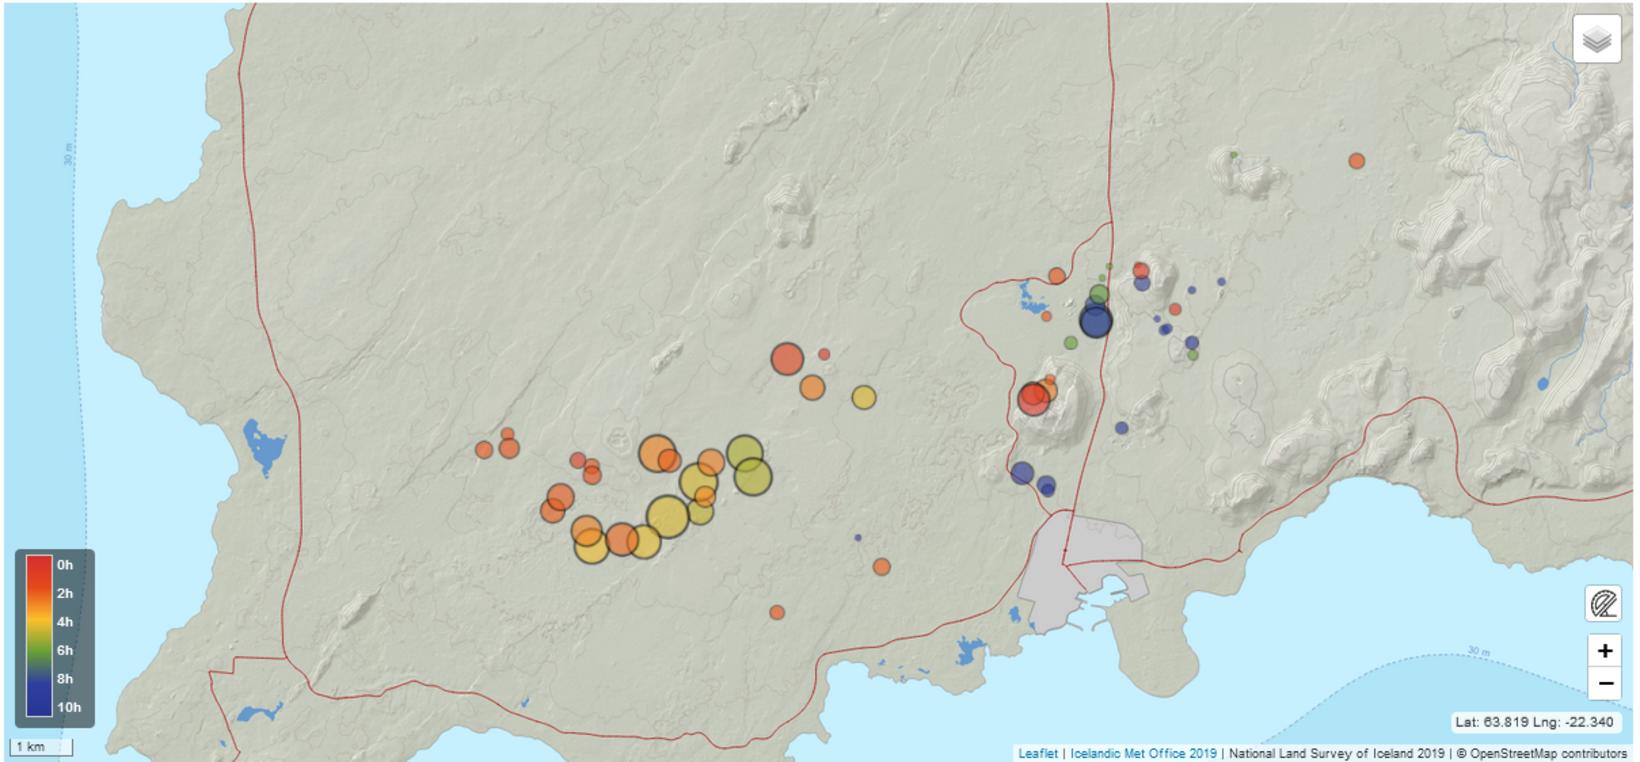 A map showing the seismic activity in the Reykjanes peninsula …